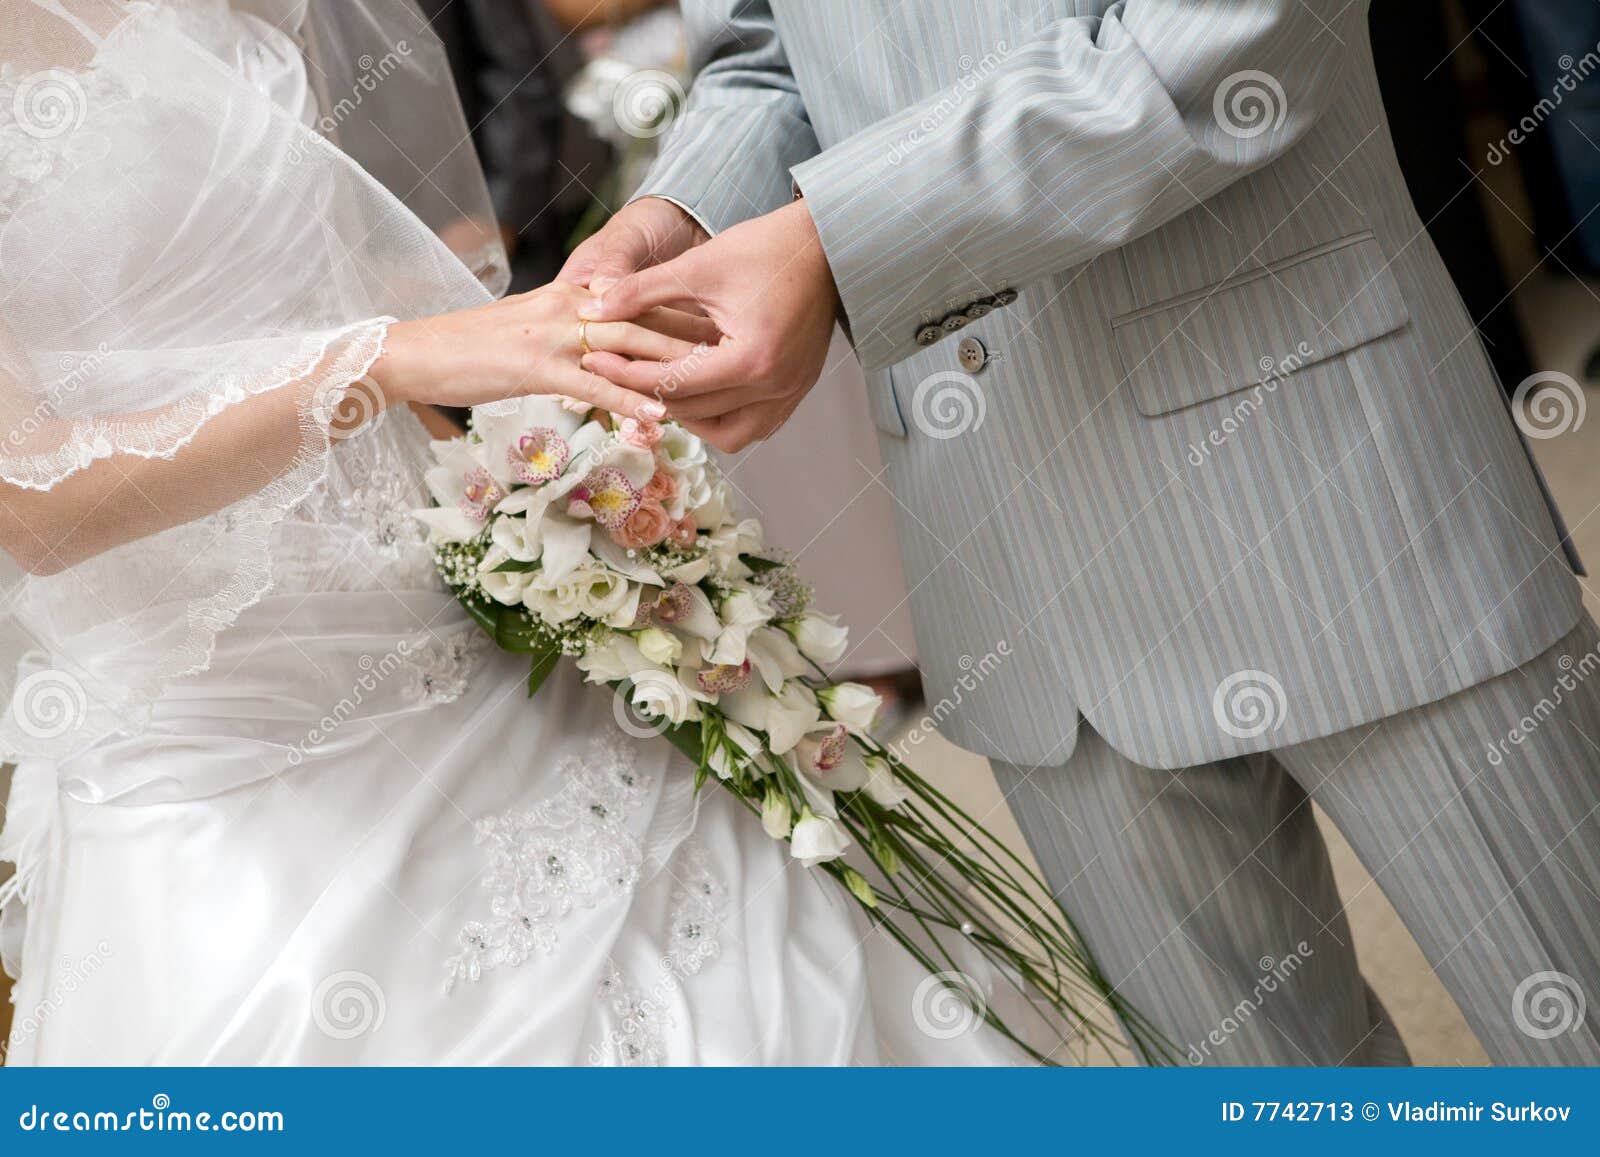 Wedding Ring Picture. Image: 7742713